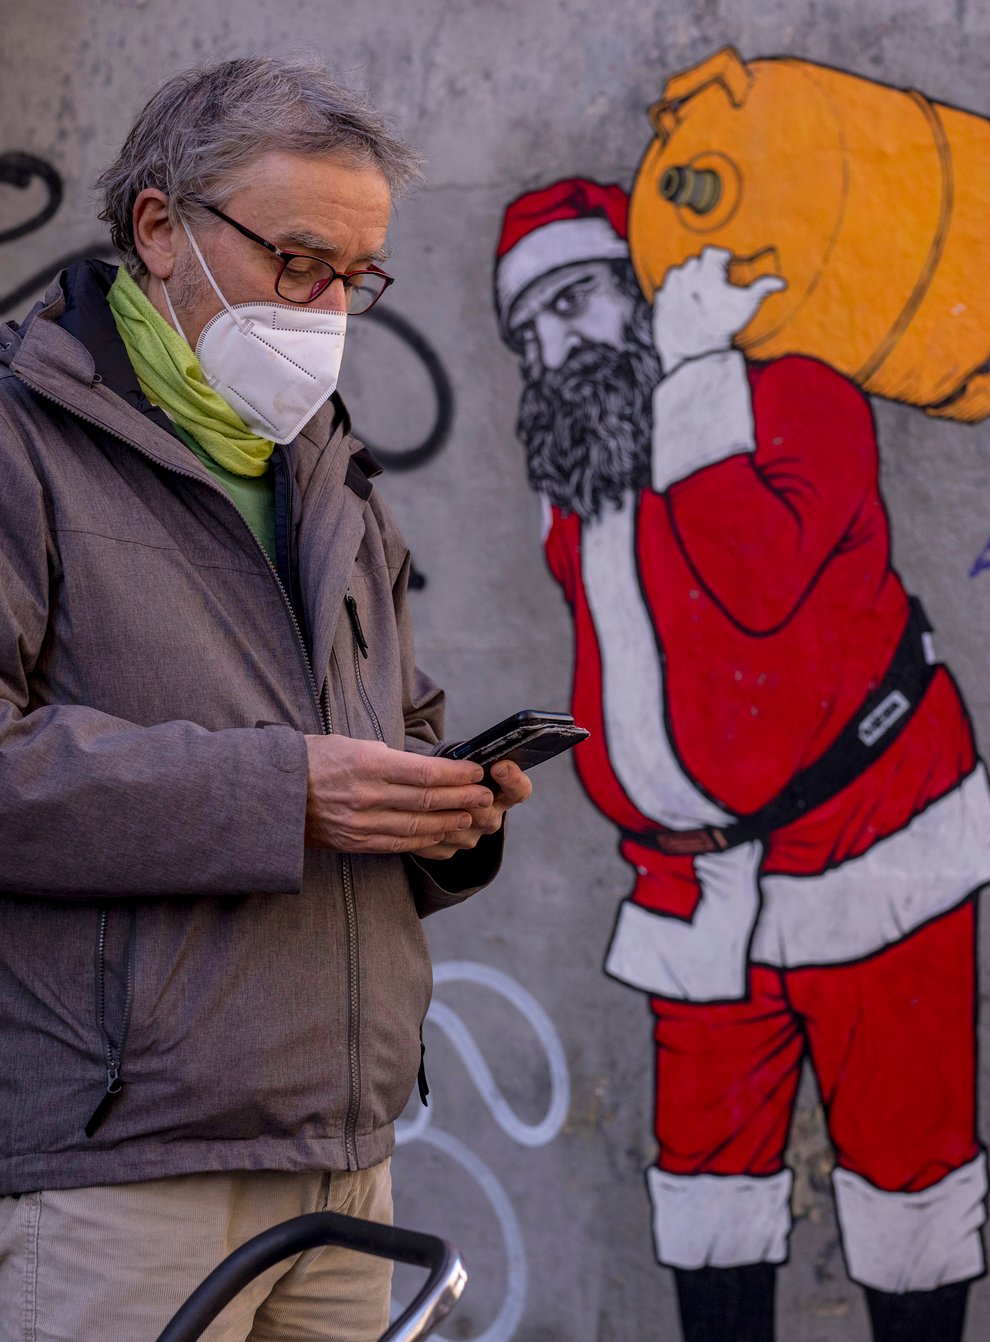 A man and woman wearing FFP2 masks to curb the spread of Covid-19 are seen in front of a mural depicting Santa Claus, in Madrid, Spain (AP)